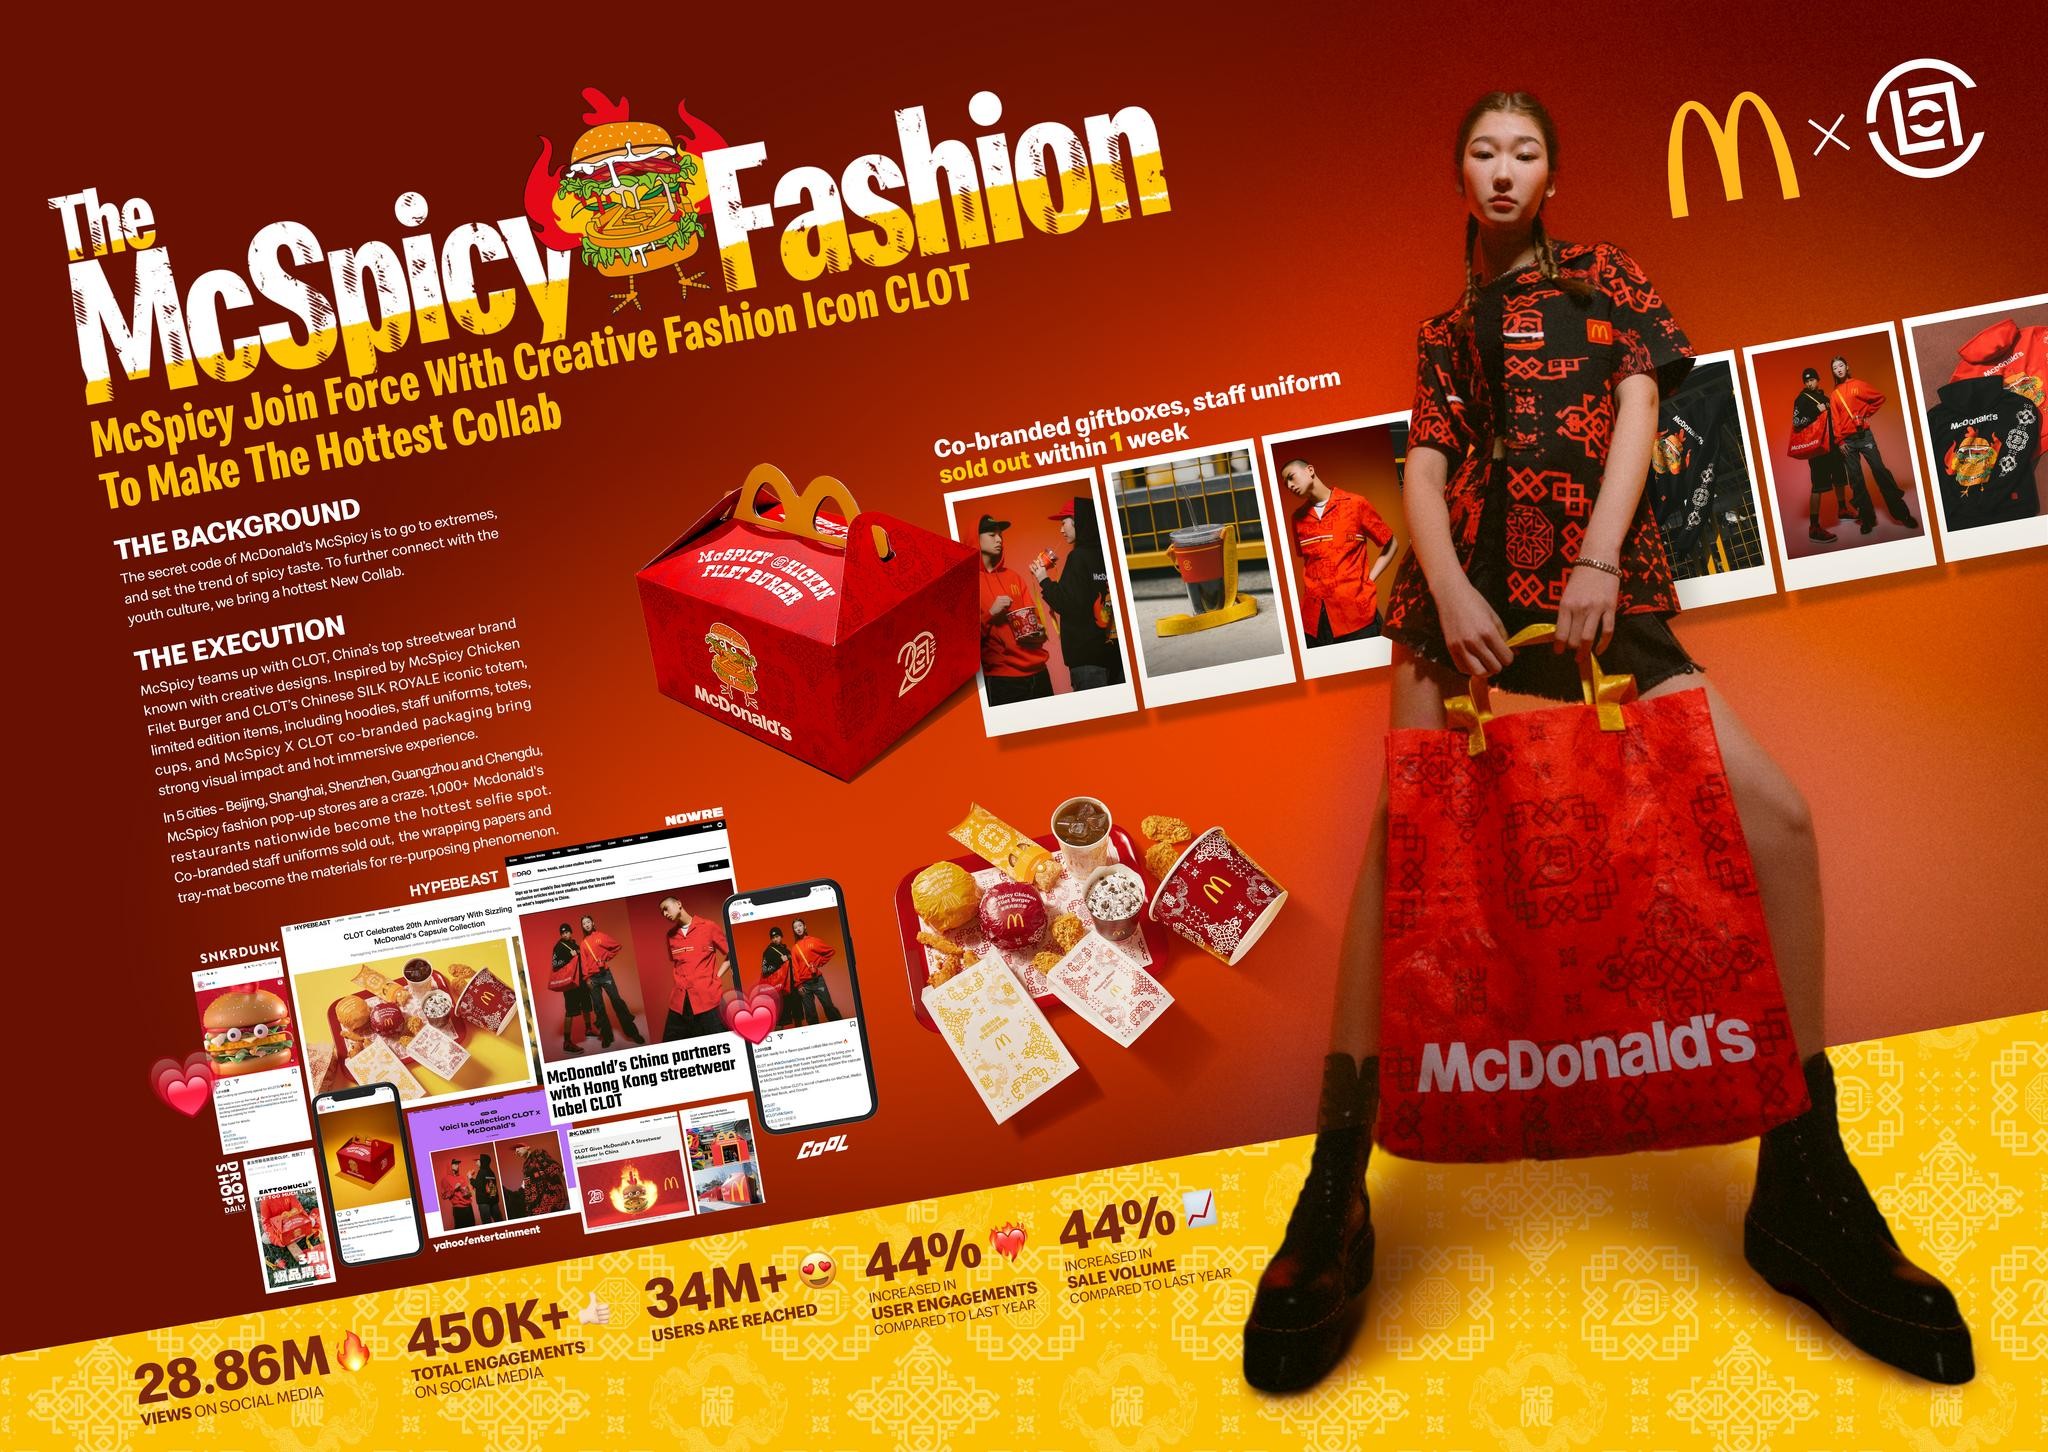 The McSpicy Fashion